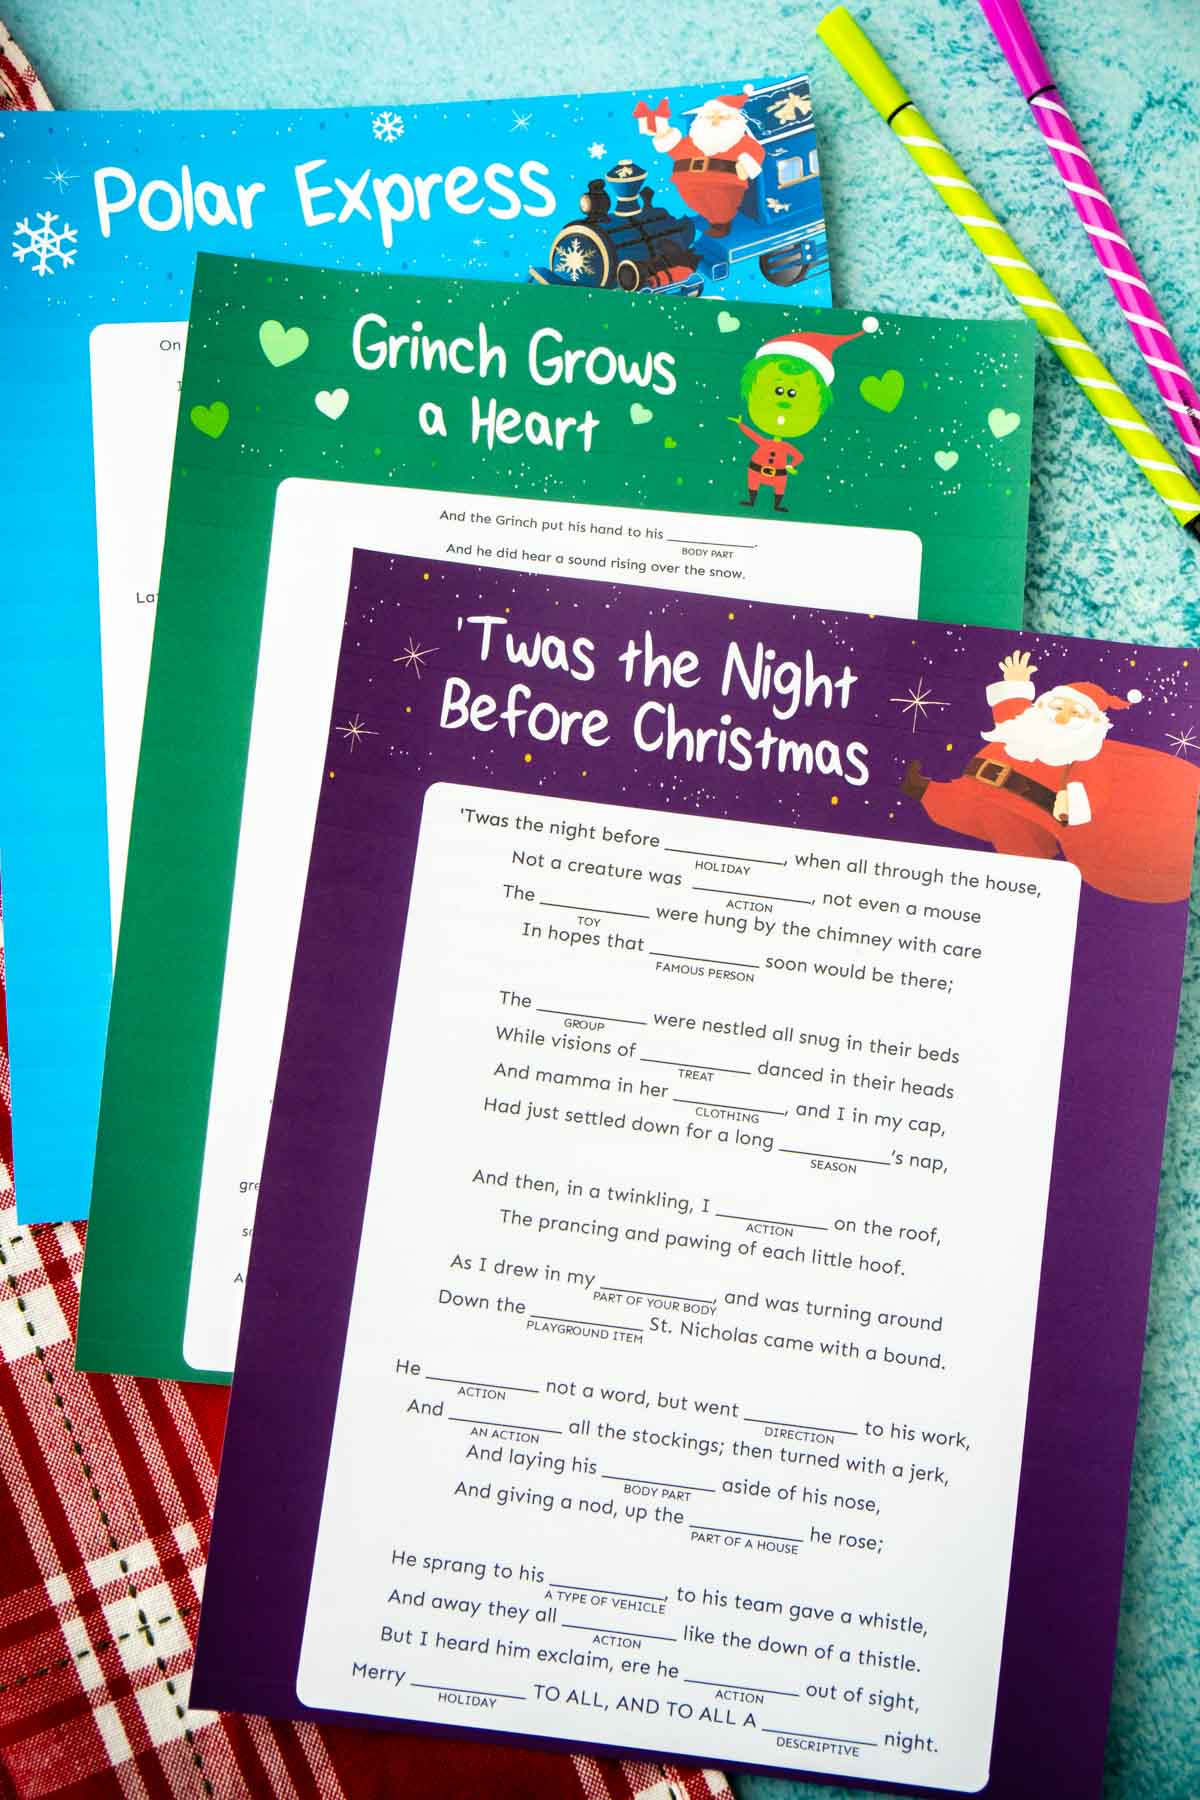 Three printed out Christmas mad libs stories